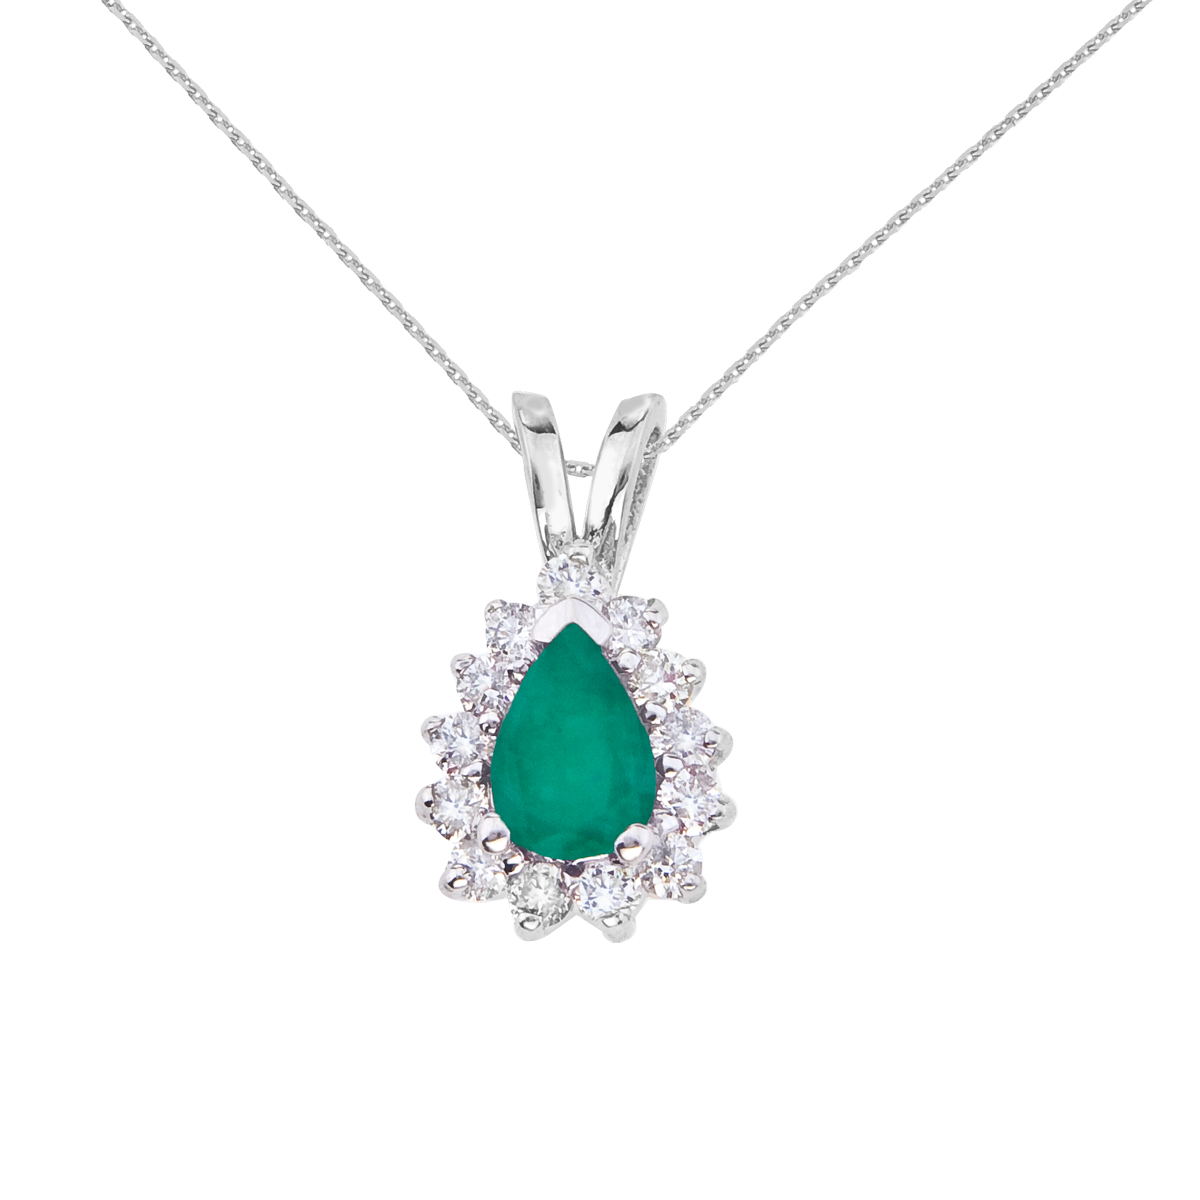 6x4 mm oval natural emerald pendant accented with bright diamonds set in 14k white gold.